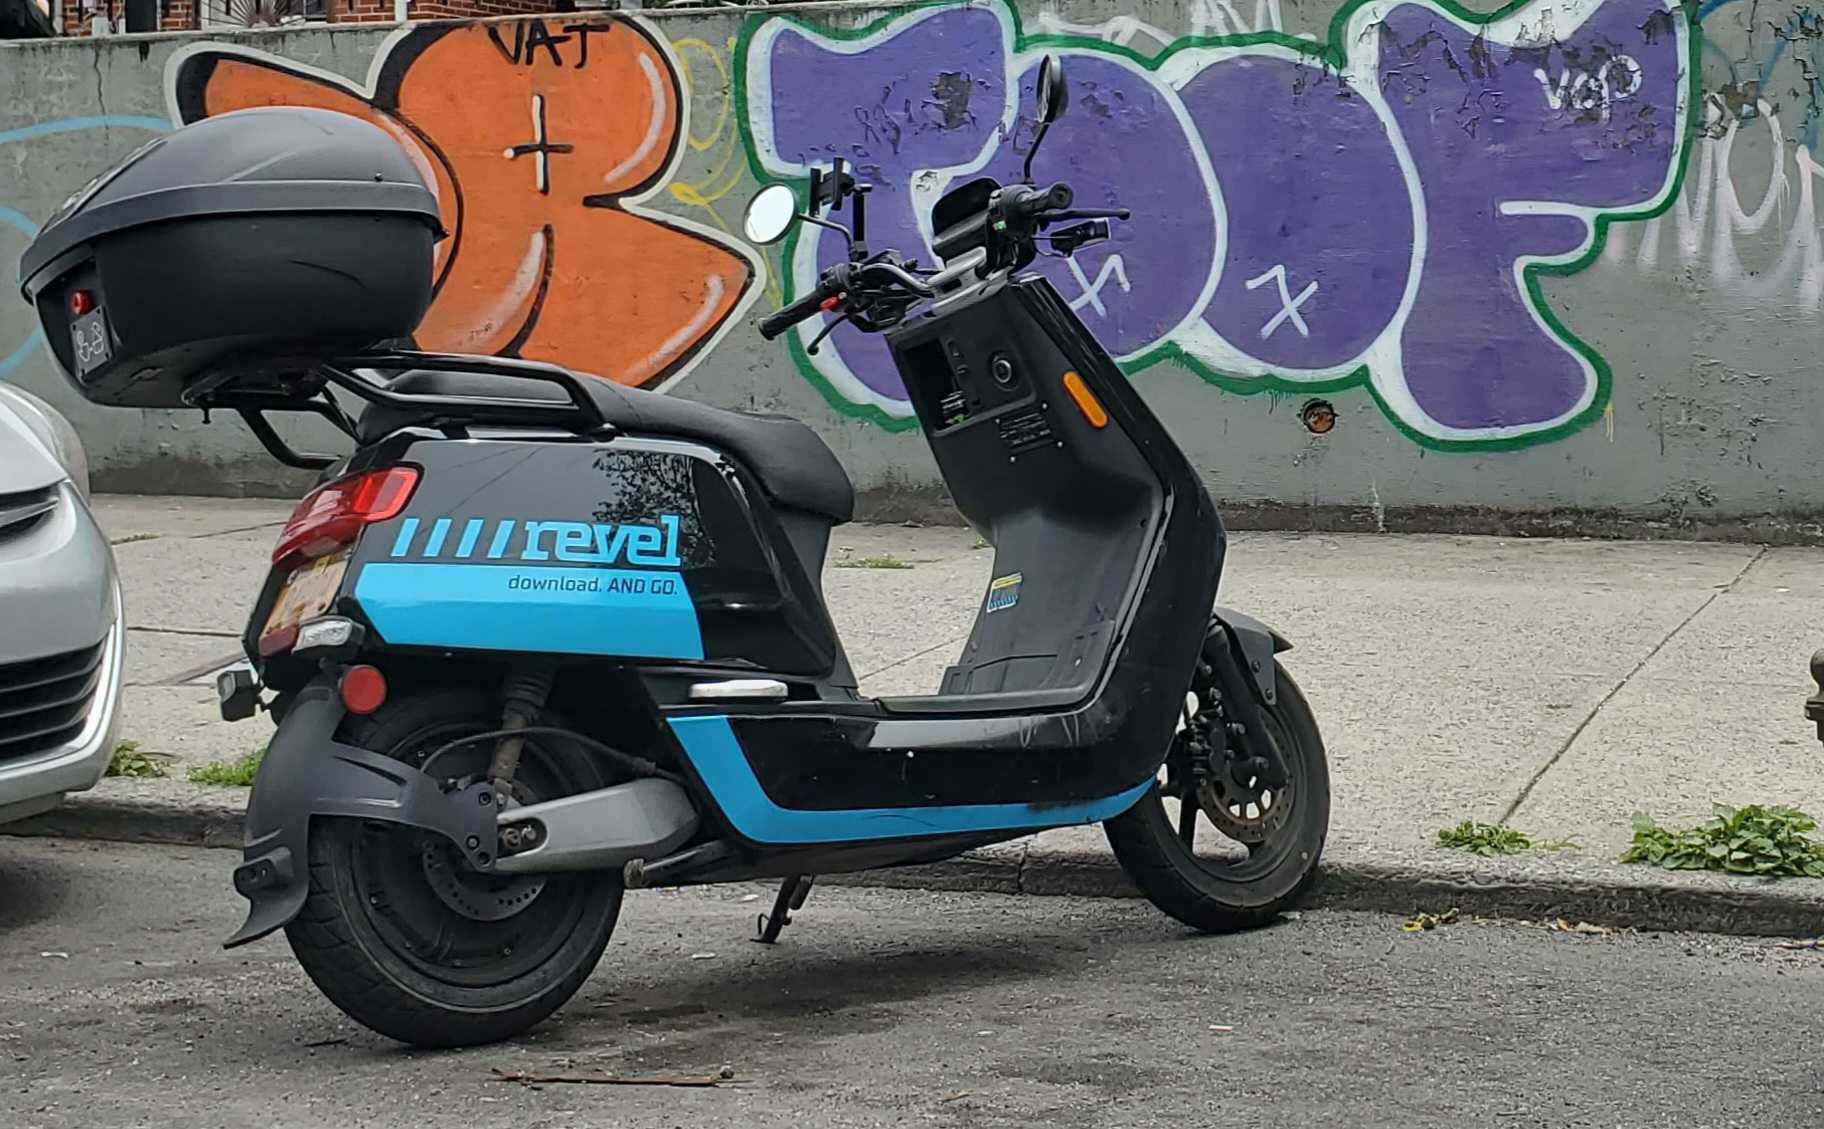 NYC startup Revel ending moped sharing service this month